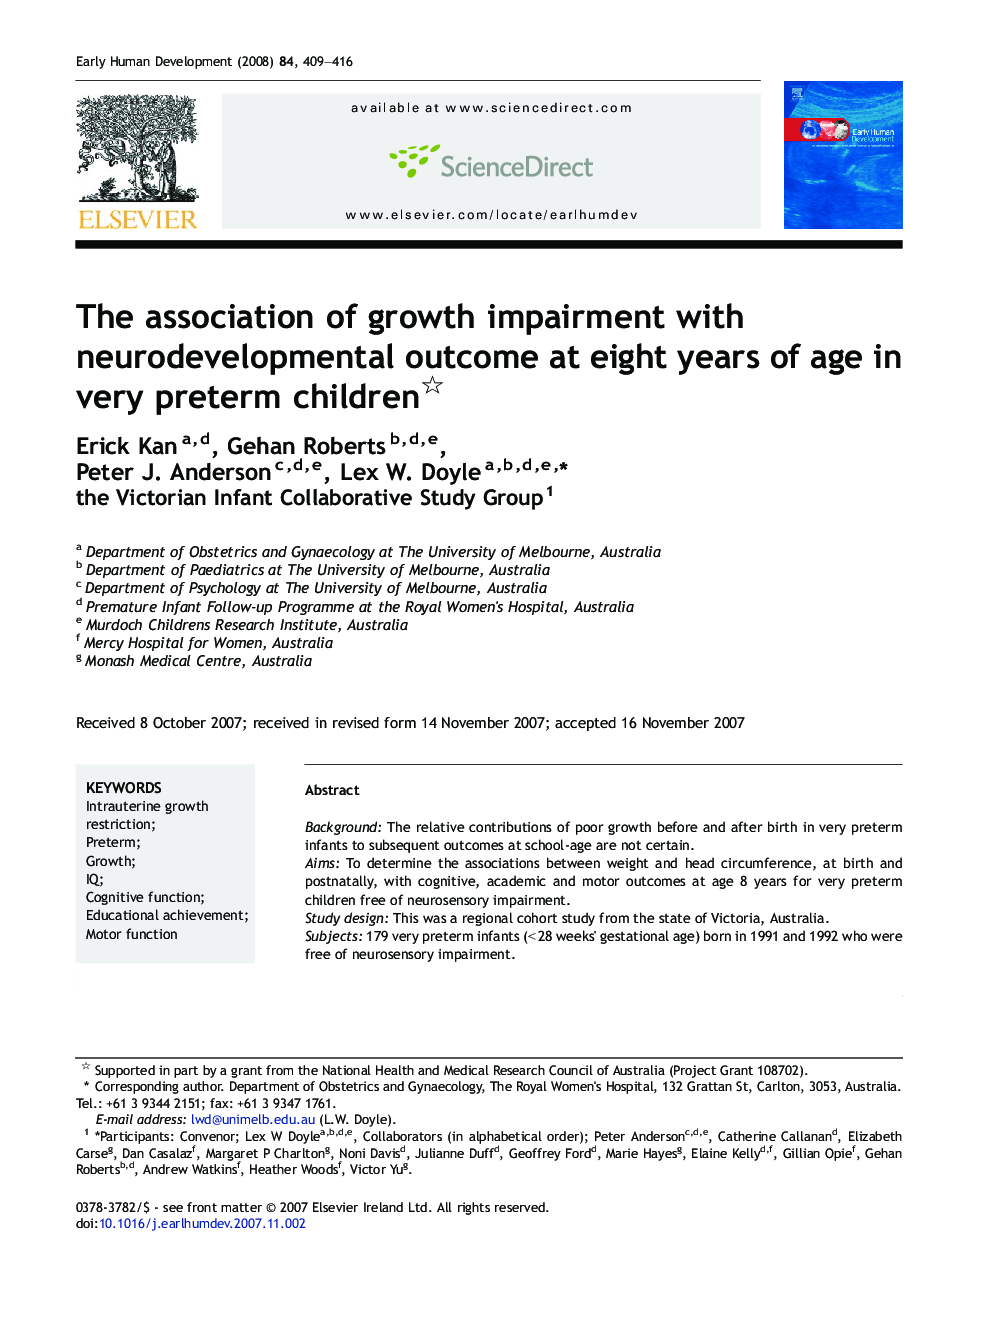 The association of growth impairment with neurodevelopmental outcome at eight years of age in very preterm children 